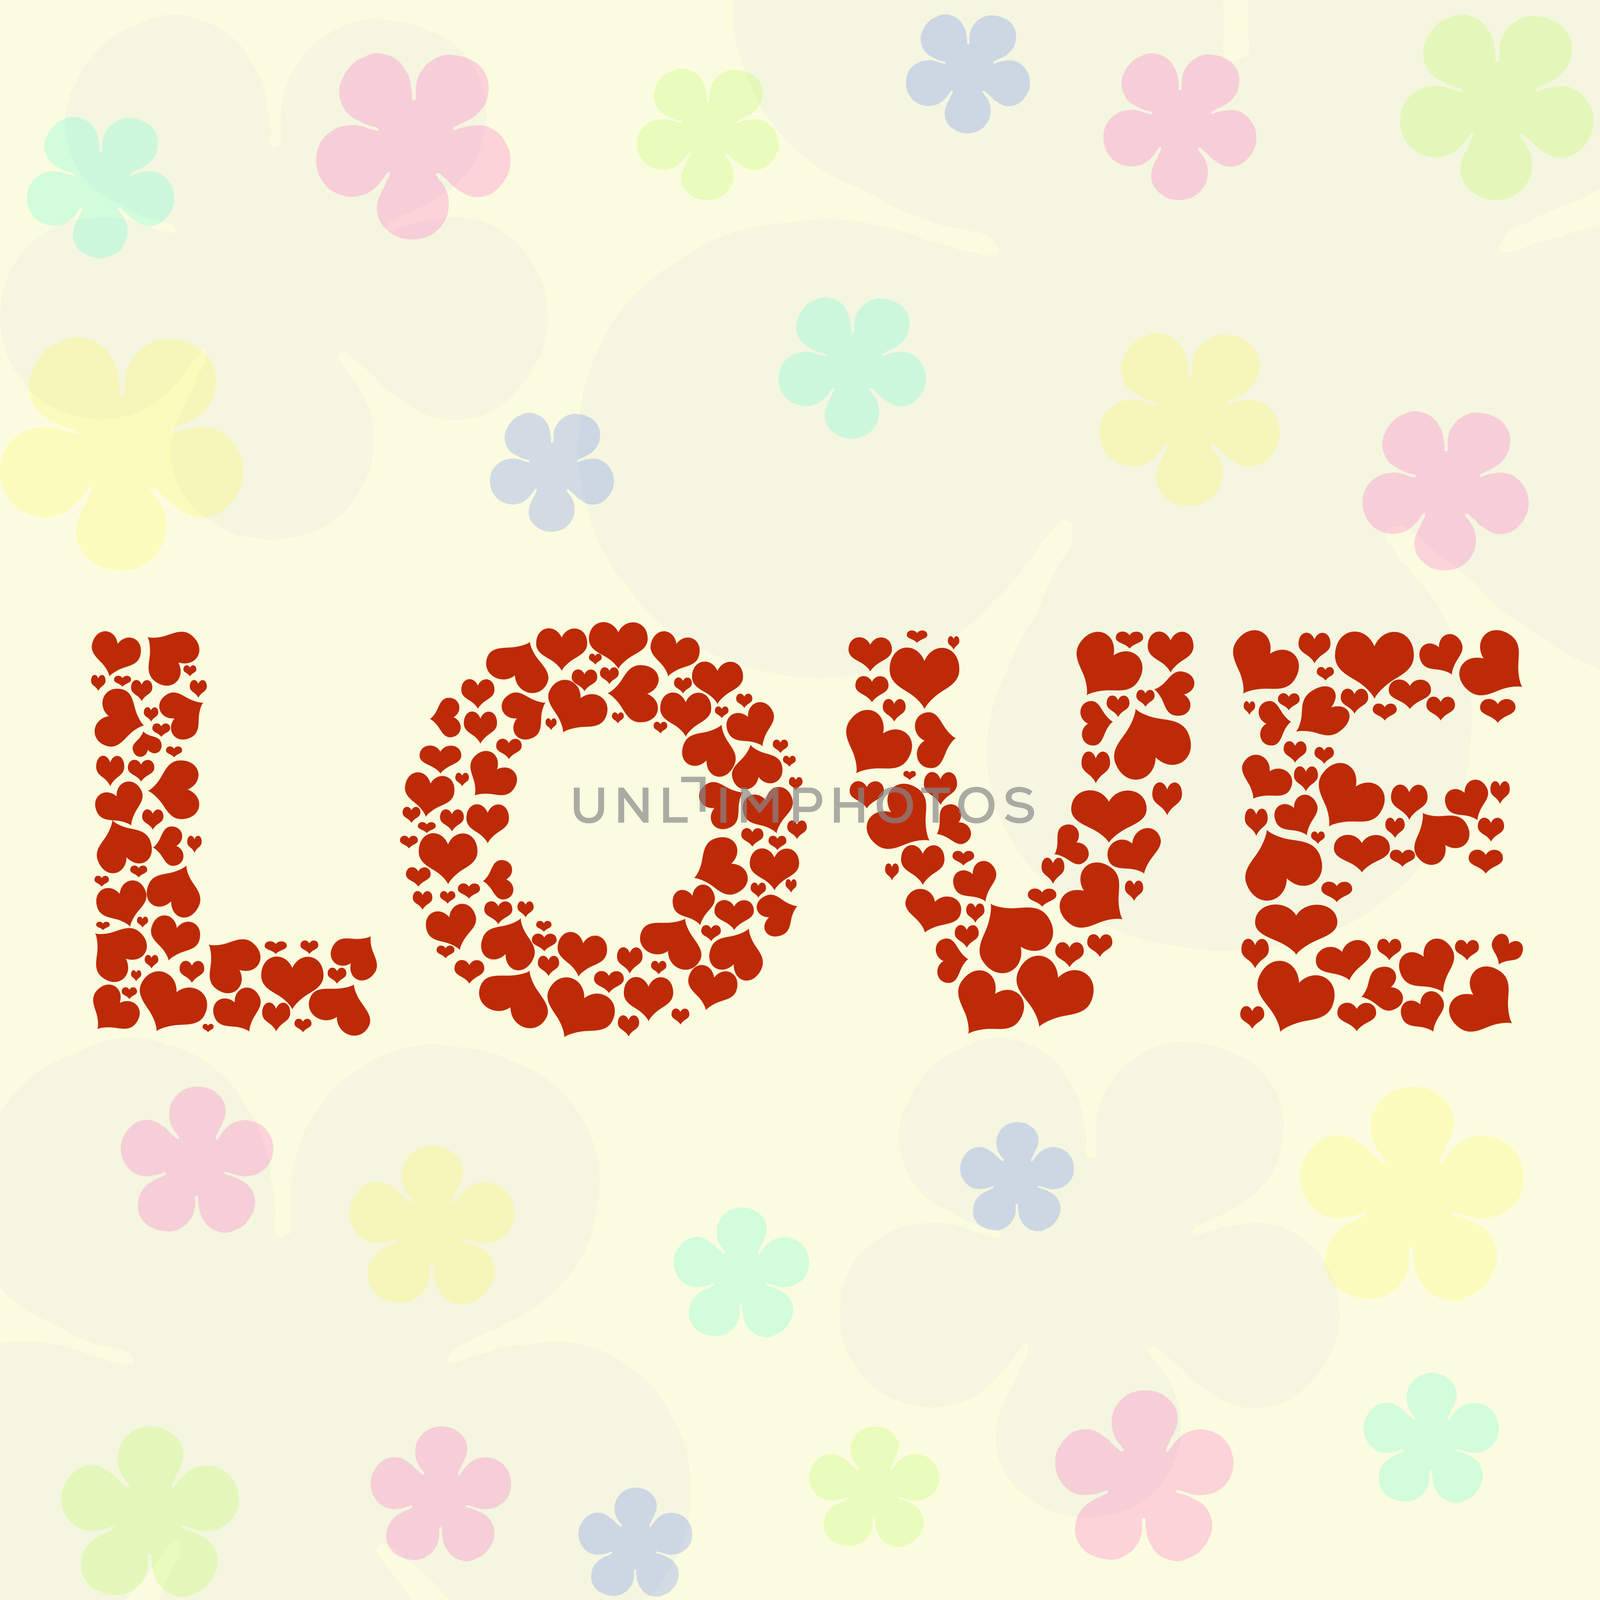 Love wording made from red heart shape on floral background.